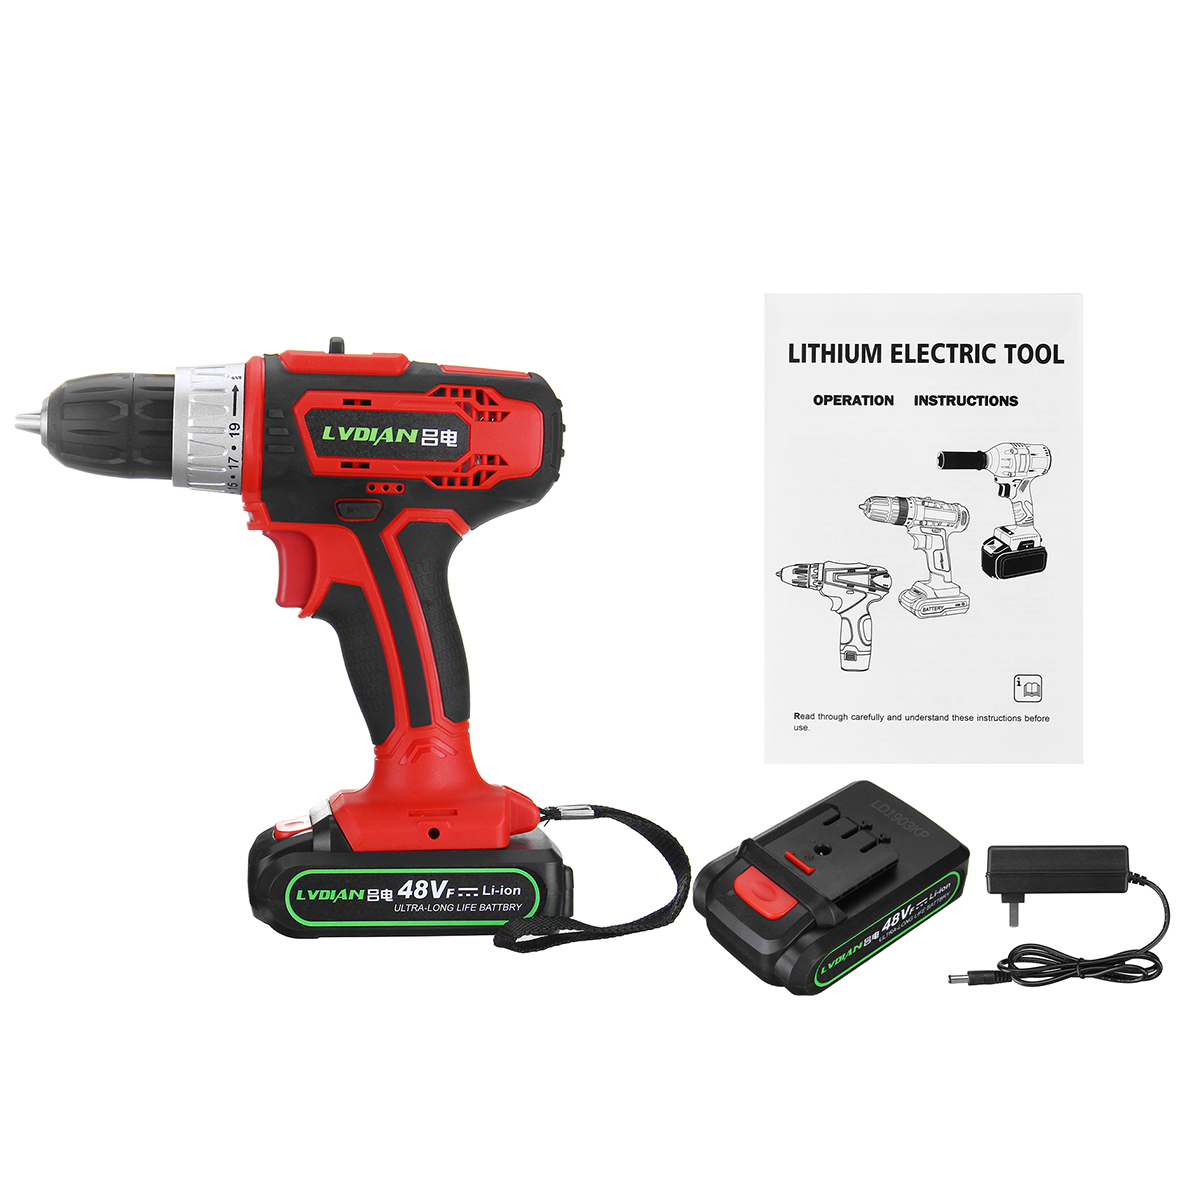 48V-2-Speed-Cordless-Electric-Screwdriver-Drill-LED-Rechargeable-Waterproof-Electric-Power-Dirver-Dr-1599546-7